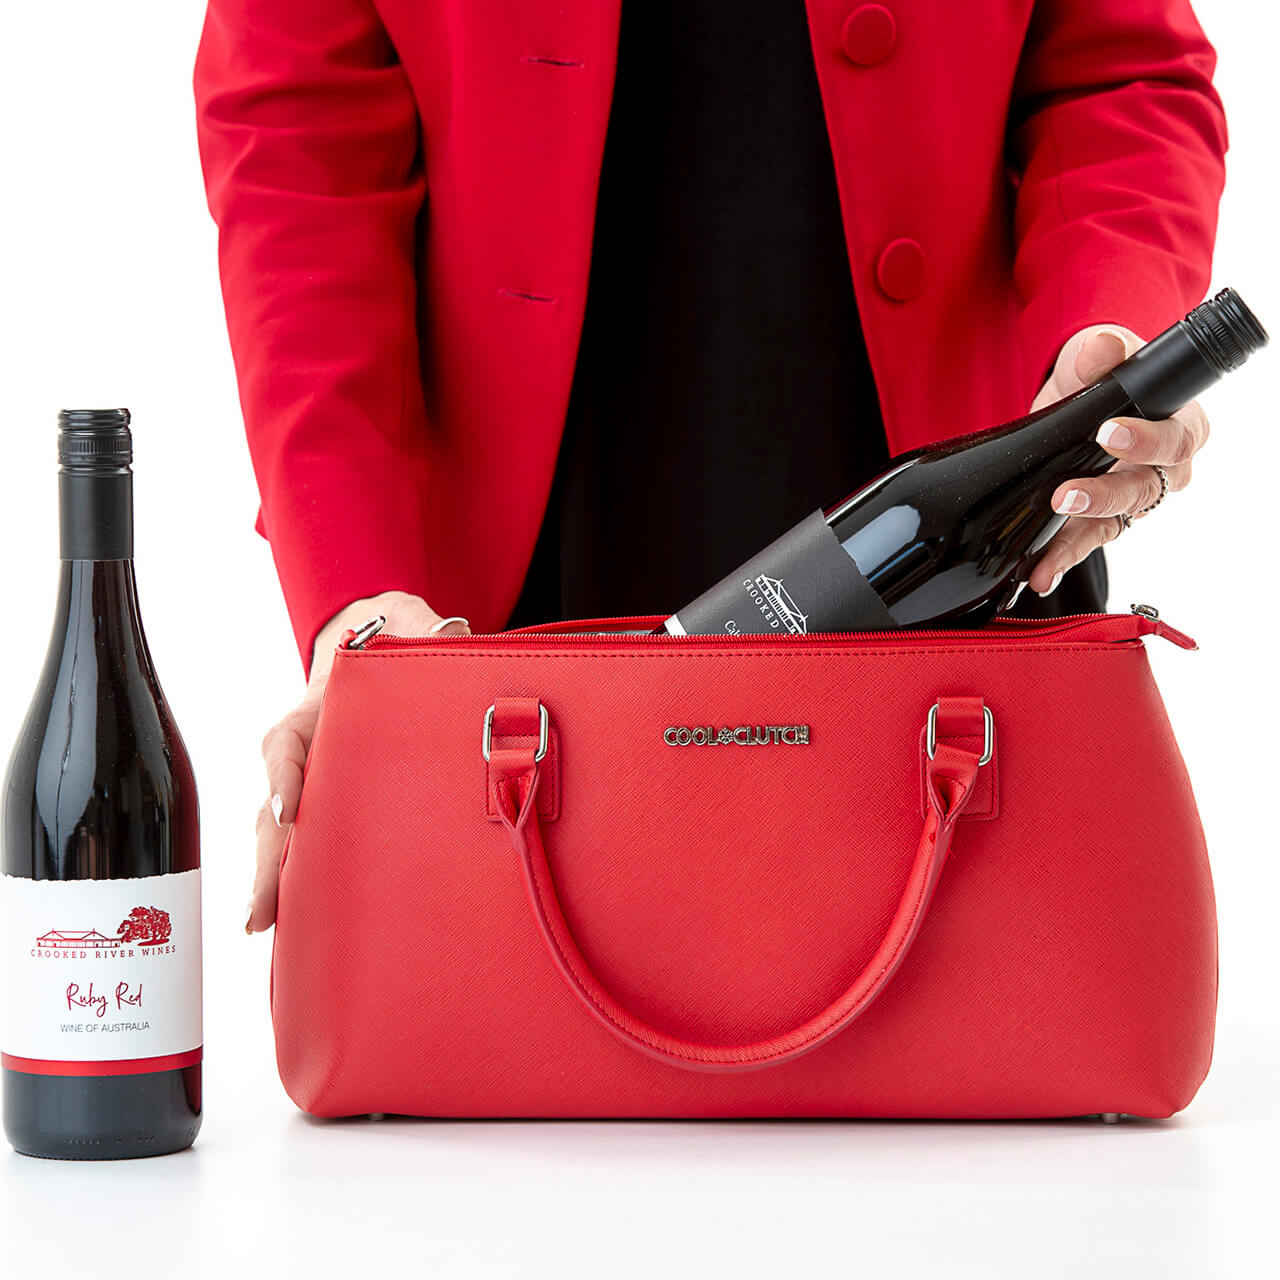 Carrie Cool Clutch (Red) Cooler bags - Cool Clutch cooler bag handbag insulated wine lunch handbags